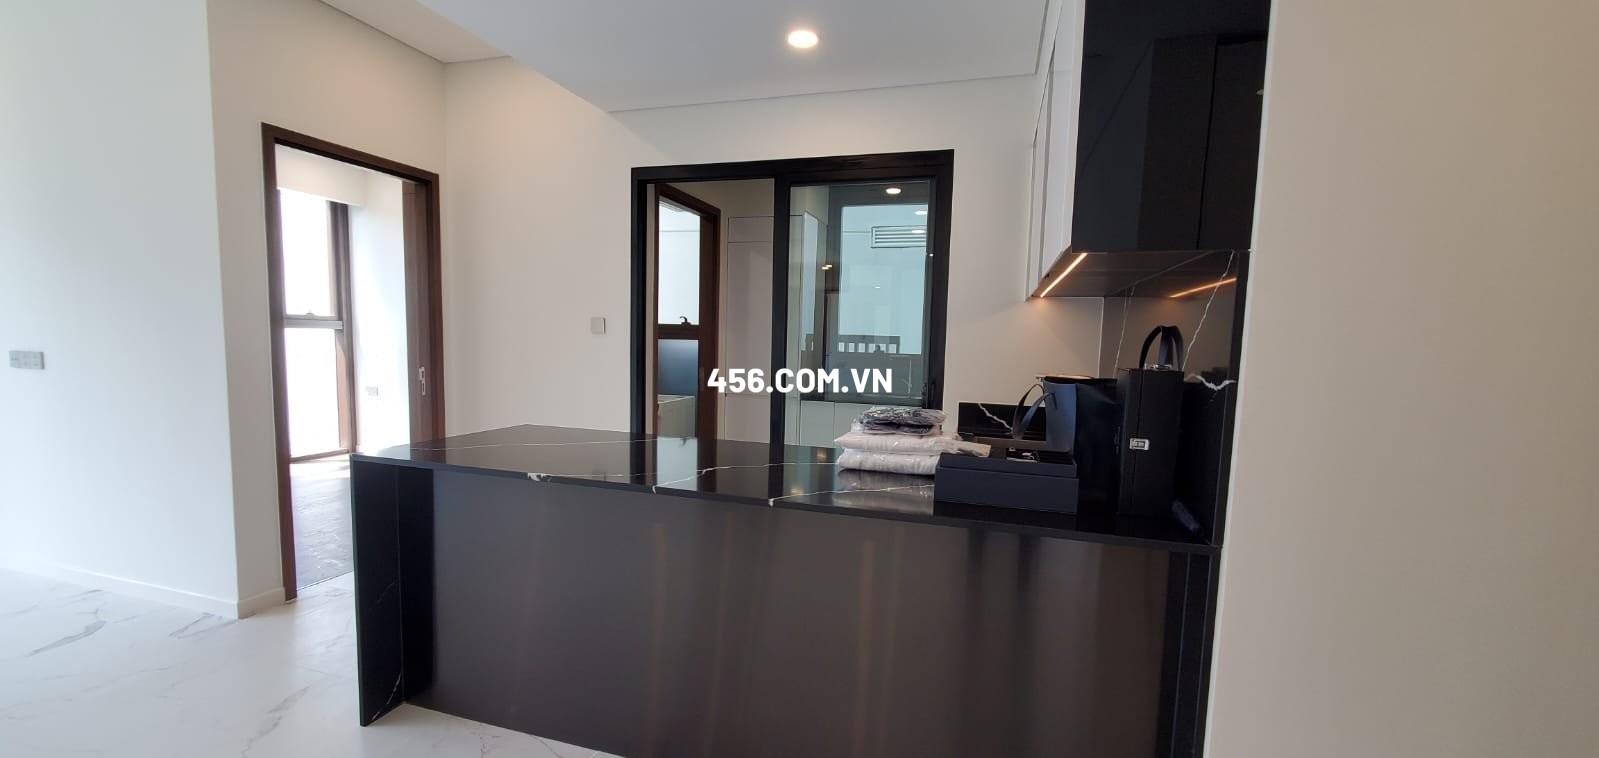 Hinh-3 Bedrooms The Metropole Thu Thiem apartment for rent with furniture